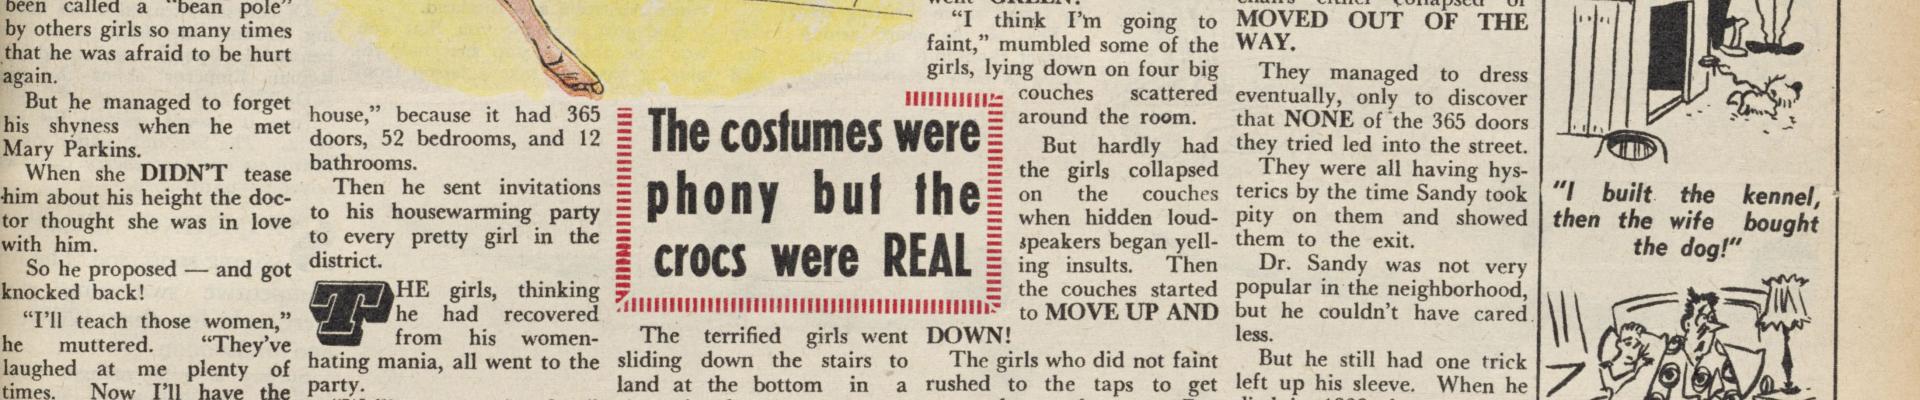 An old magazine page, with the main headline: "The doctor who hated women: He gave the girls vanishing swimsuits!"